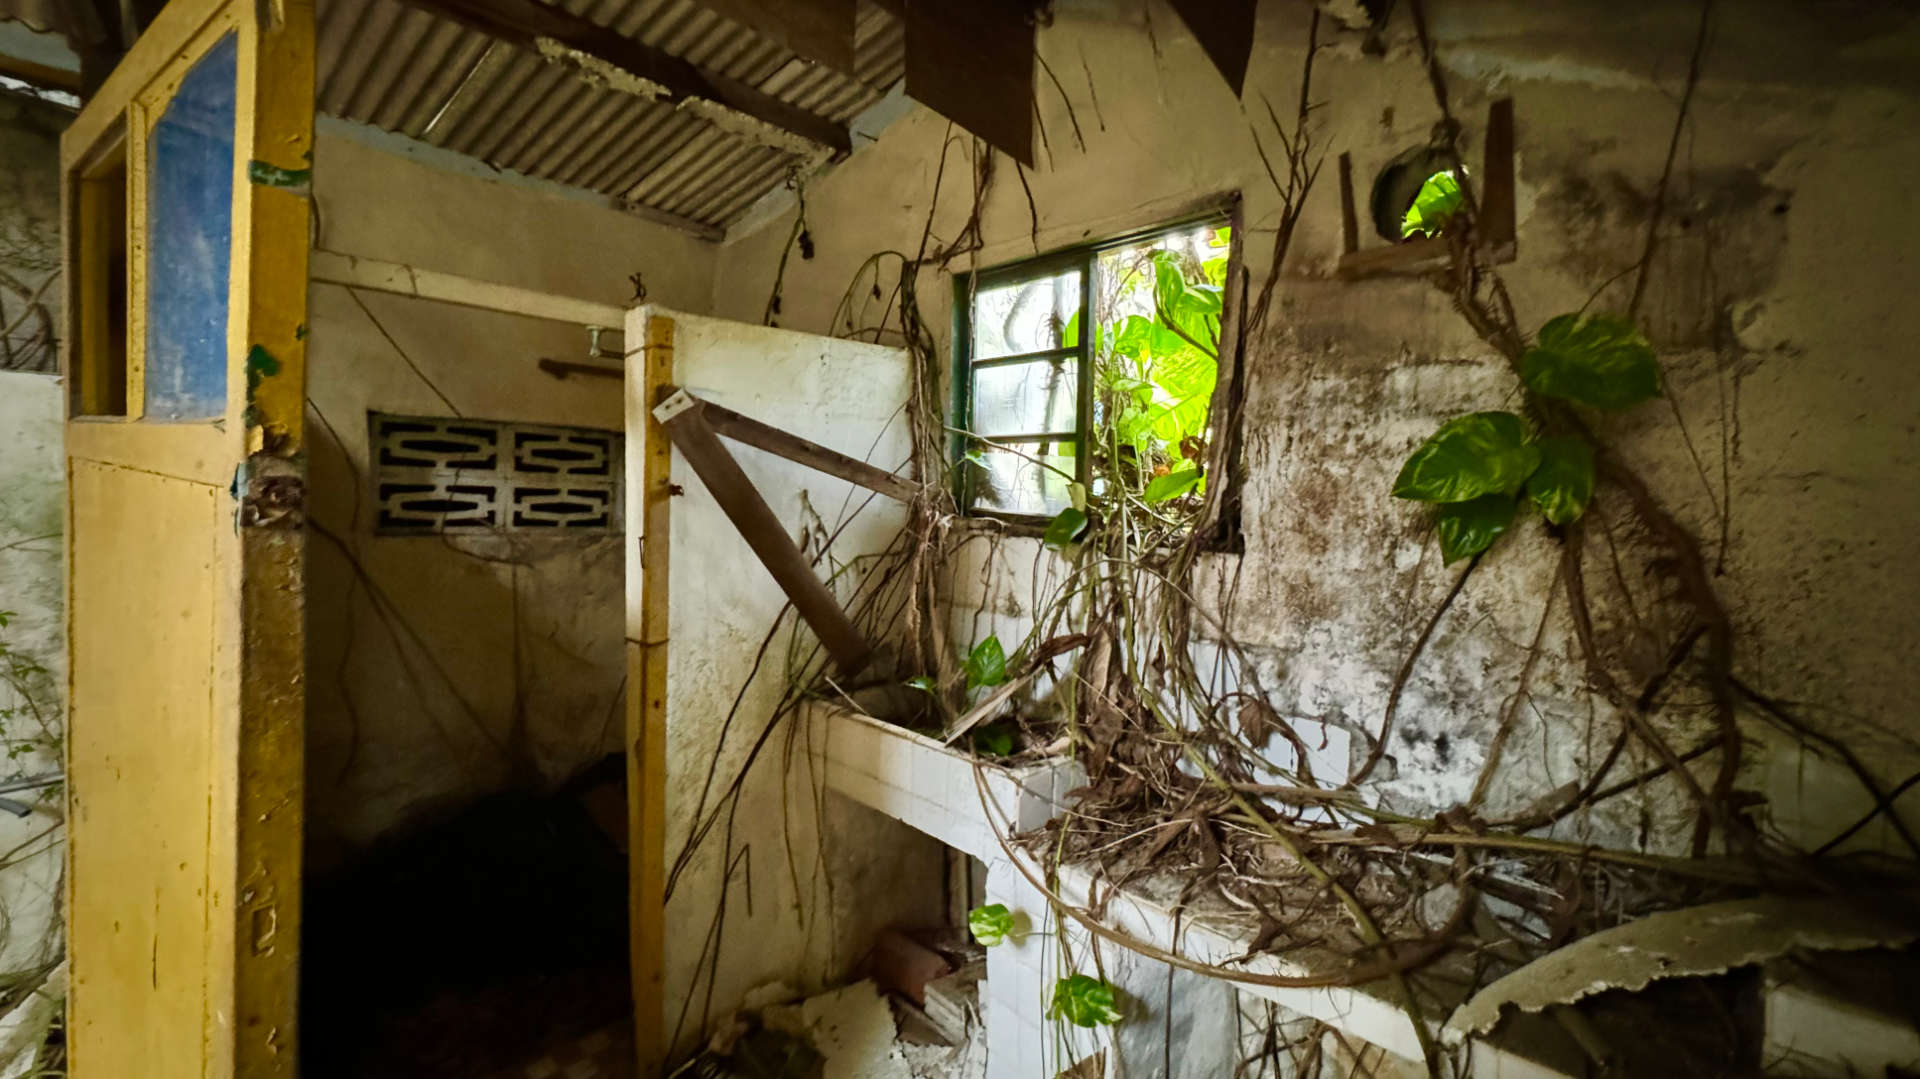 Interior of an abandoned house. Some roof supports have collapsed and there are vines growing through the windows.